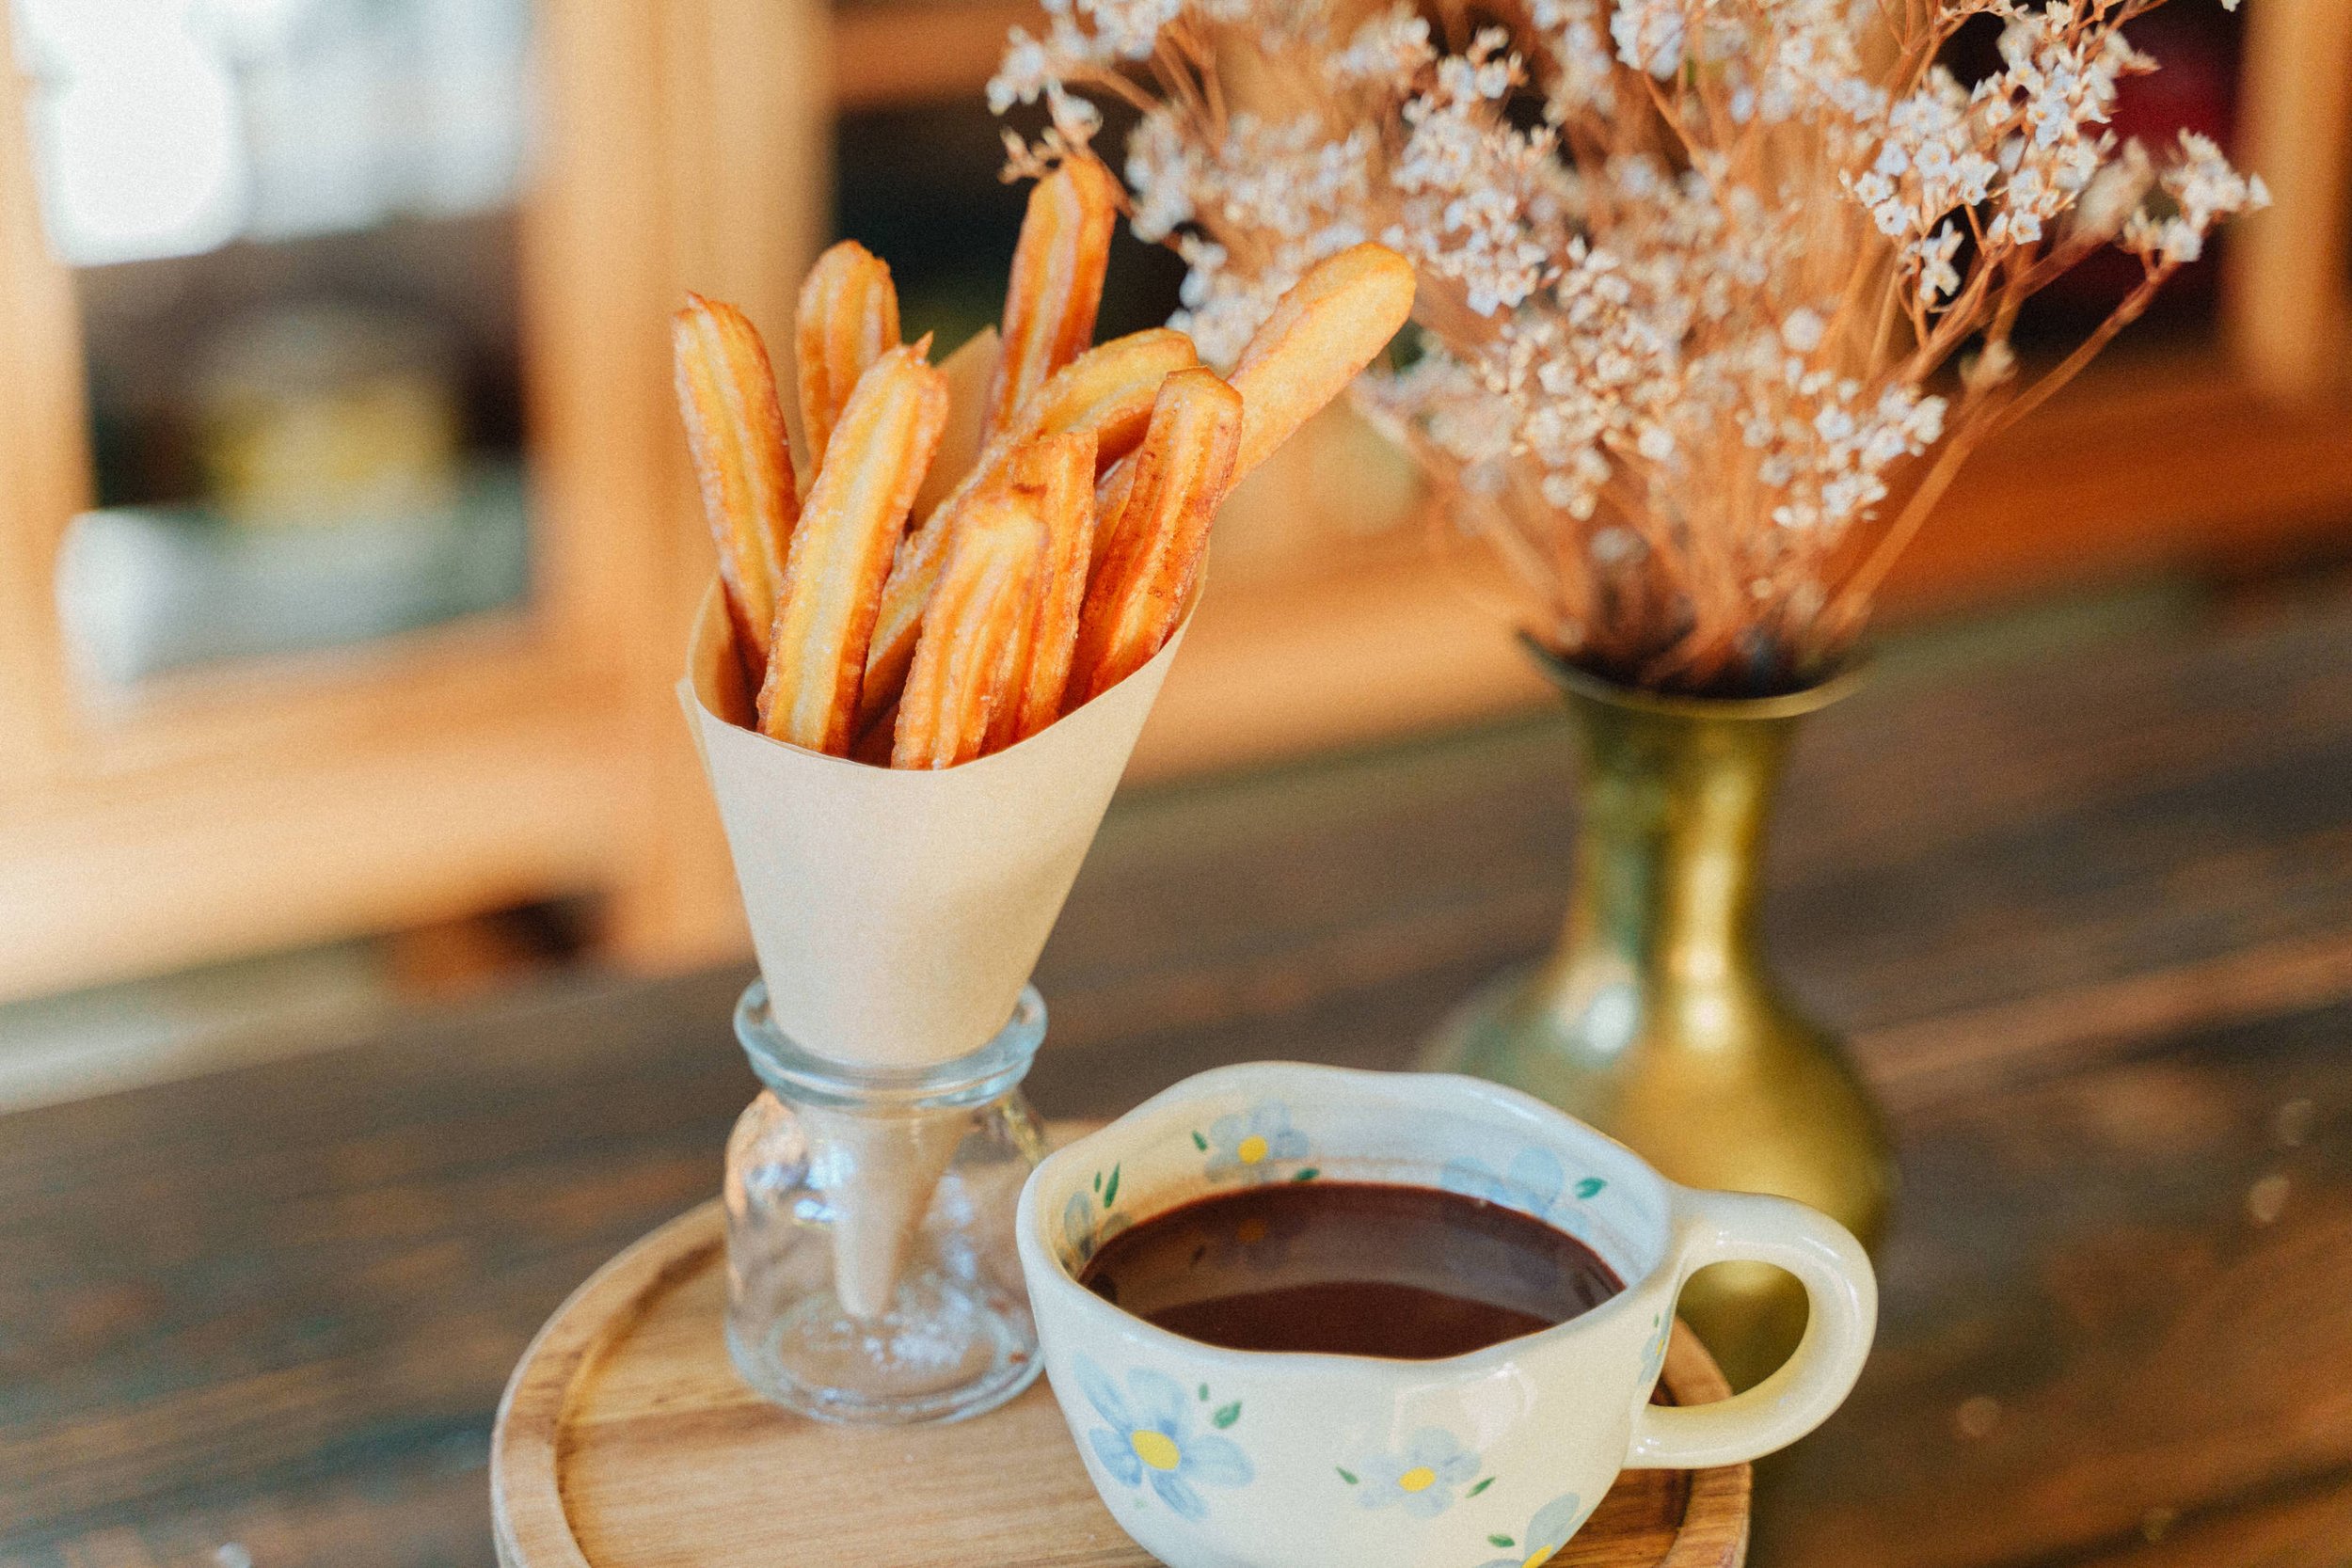 Churros - Breakfast from 7 Different Countries - Her86m2 3.jpg